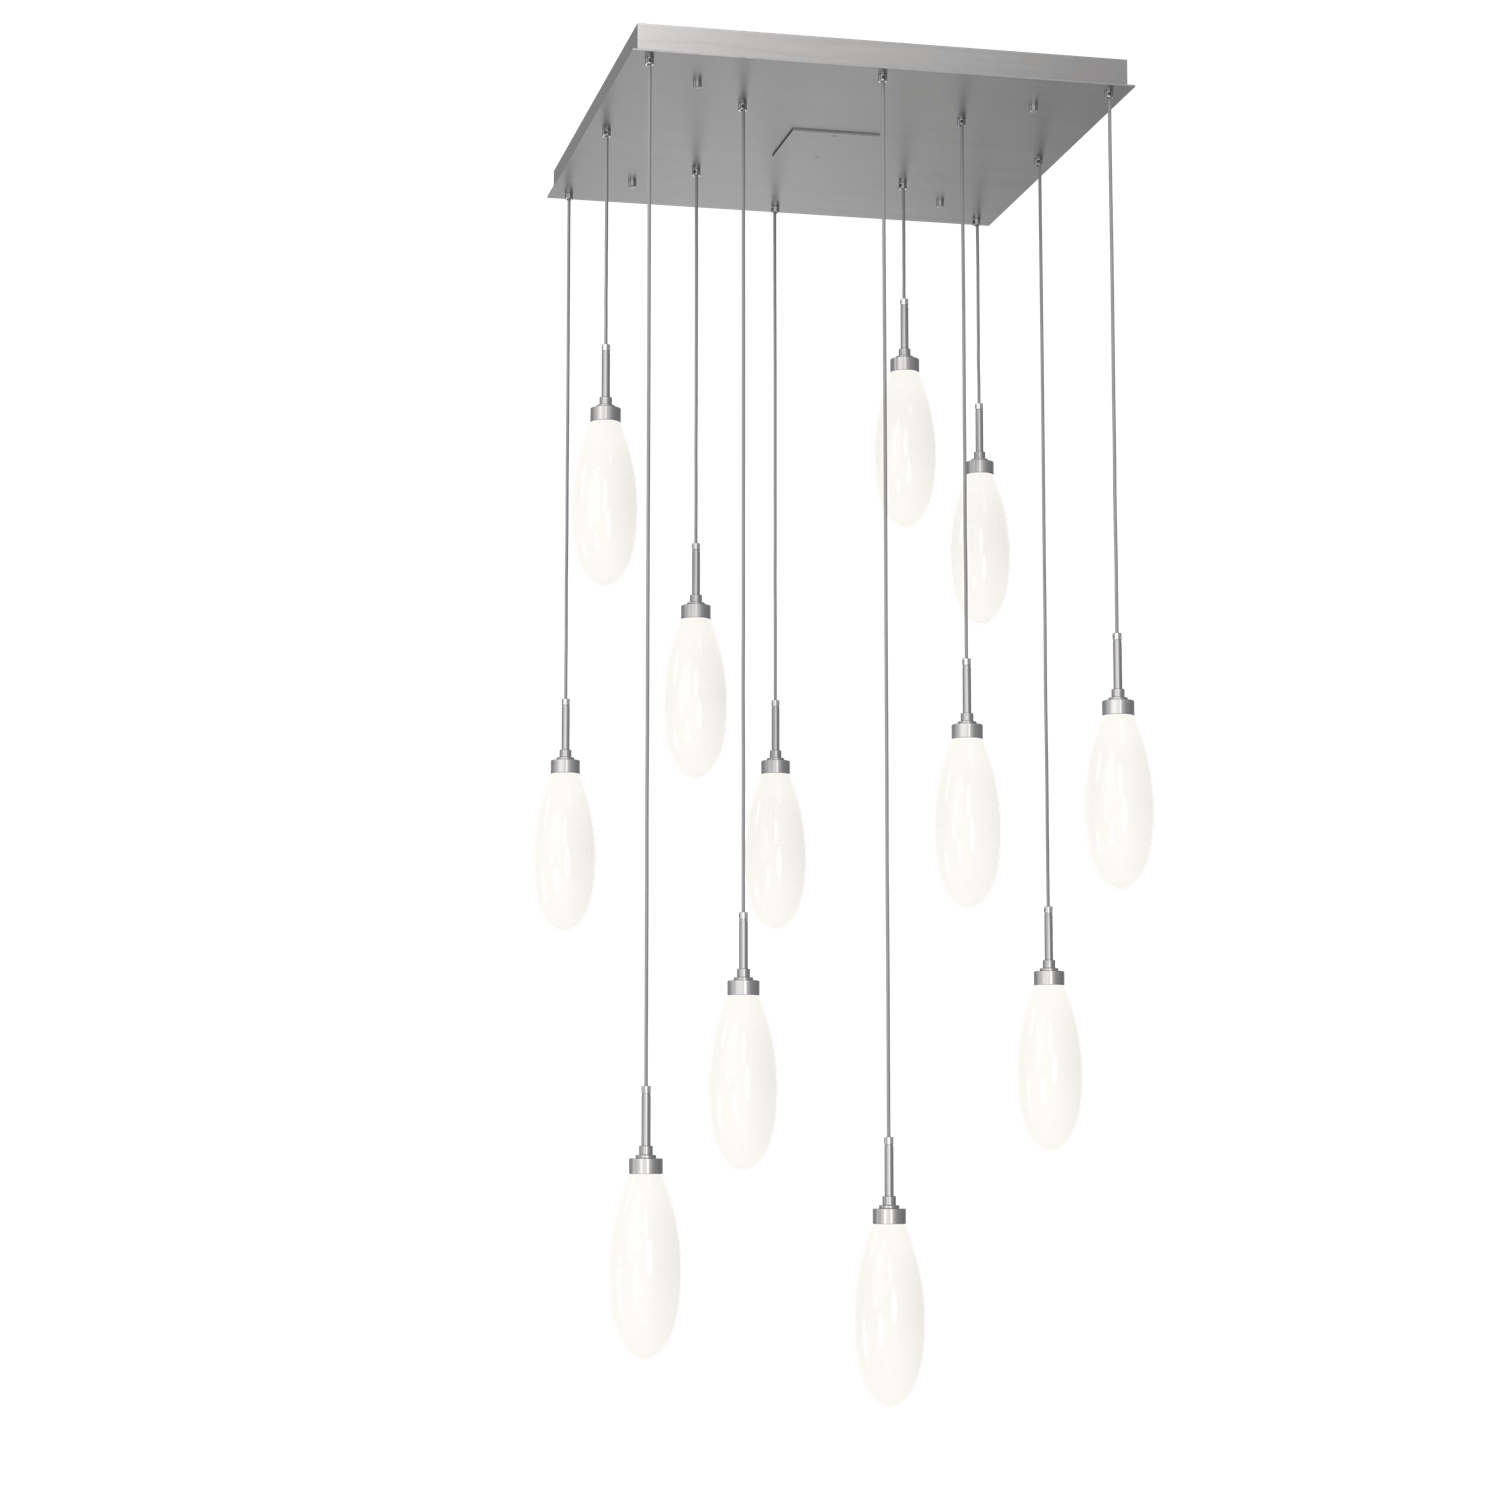 CHB0071-12-SN-WL-LL-Hammerton-Studio-Fiori-12-light-square-pendant-chandelier-with-satin-nickel-finish-and-opal-white-glass-shades-and-LED-lamping